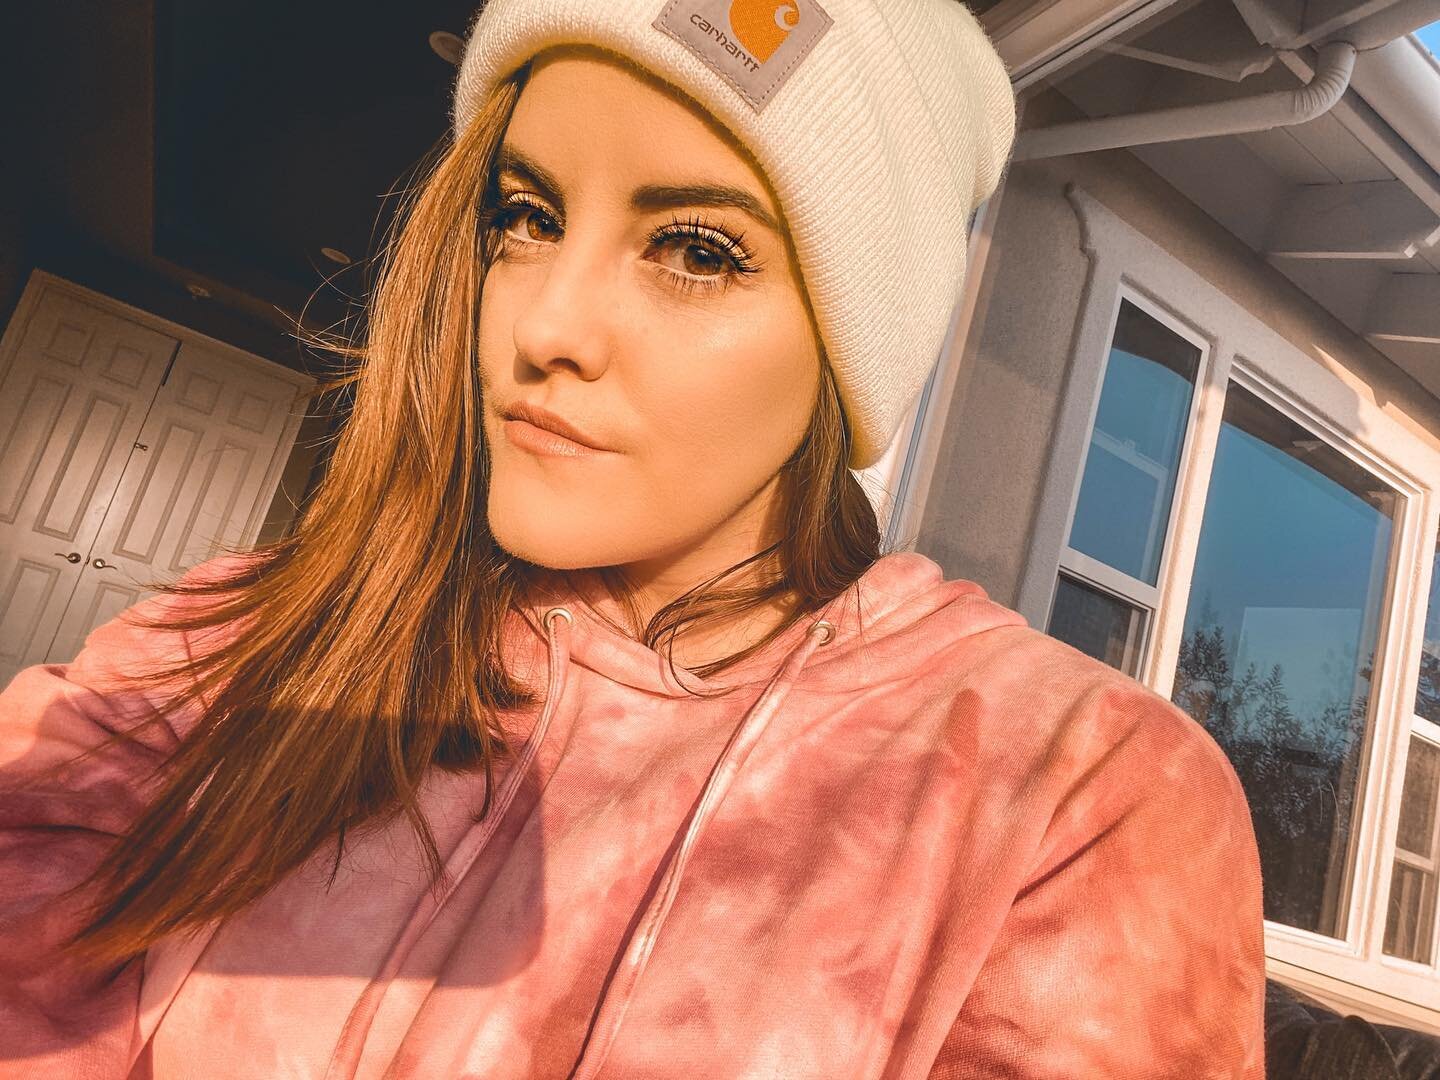 Happy New Year!  Let&rsquo;s raise one to the end of 2020. 🥂🍾 Even though I love me a good @carhartt beanie, my FAVORITE New Year&rsquo;s present is all of you! 🥰 Let&rsquo;s make 2021 ROCK! 🤘

P.S. this is where I shamelessly self-promote &ldquo